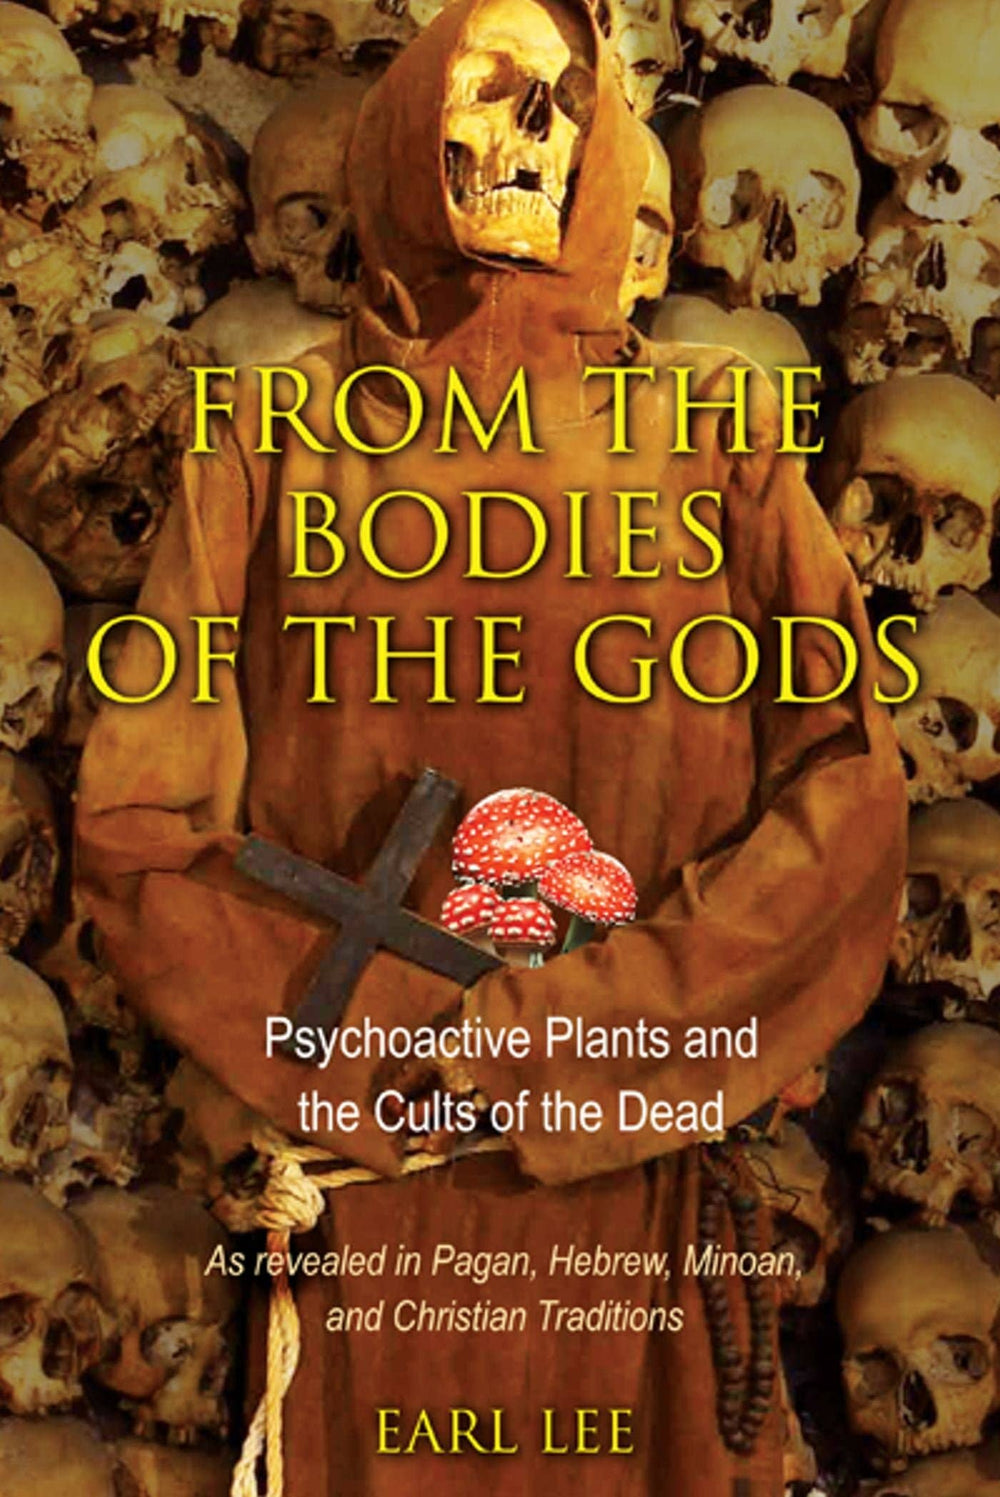 From The Bodies Of The Gods: Psychoactive Plants & Cults